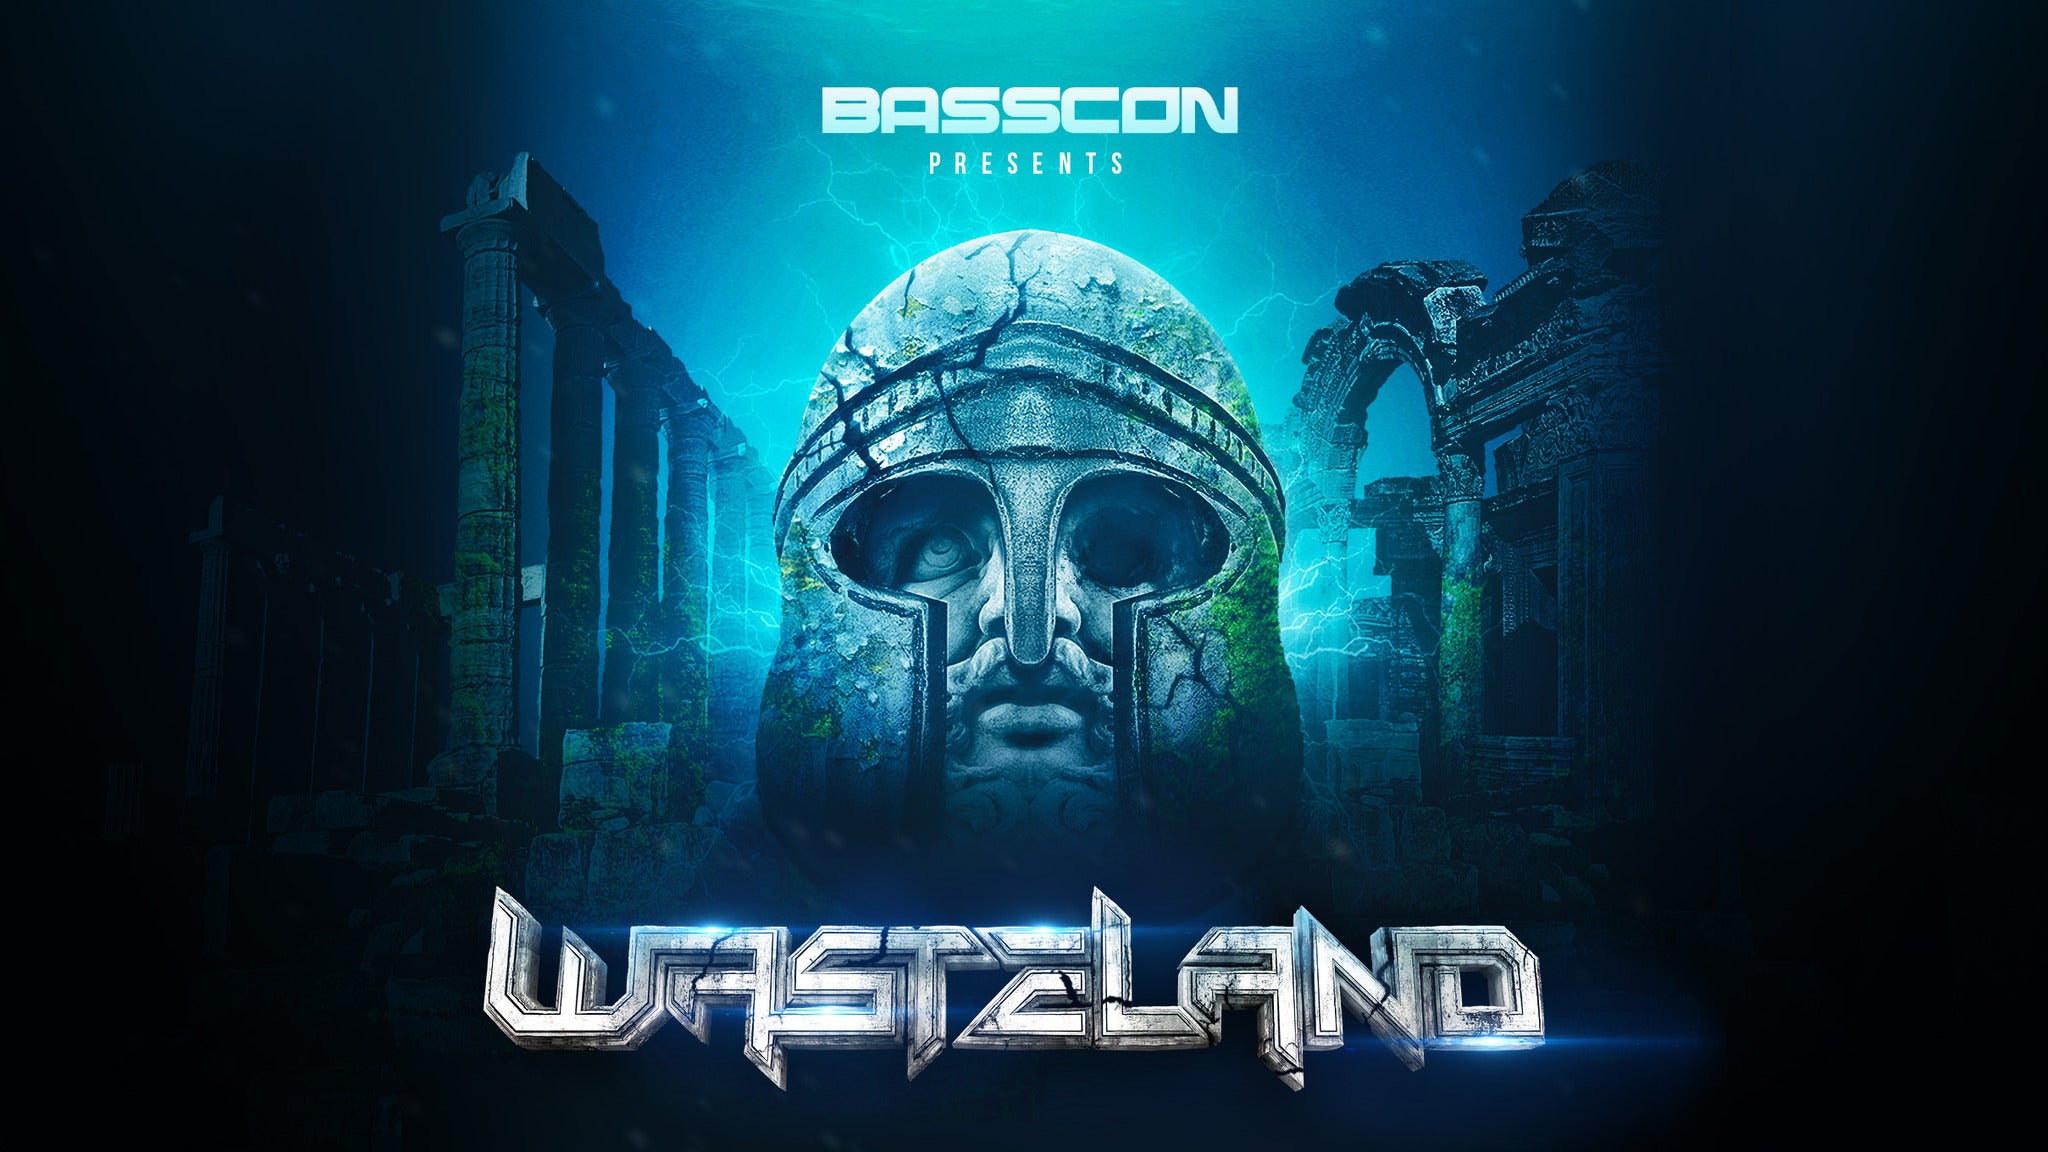 Basscon - WASTELAND 2 Day Pass in Hollywood promo photo for Basscon presale offer code